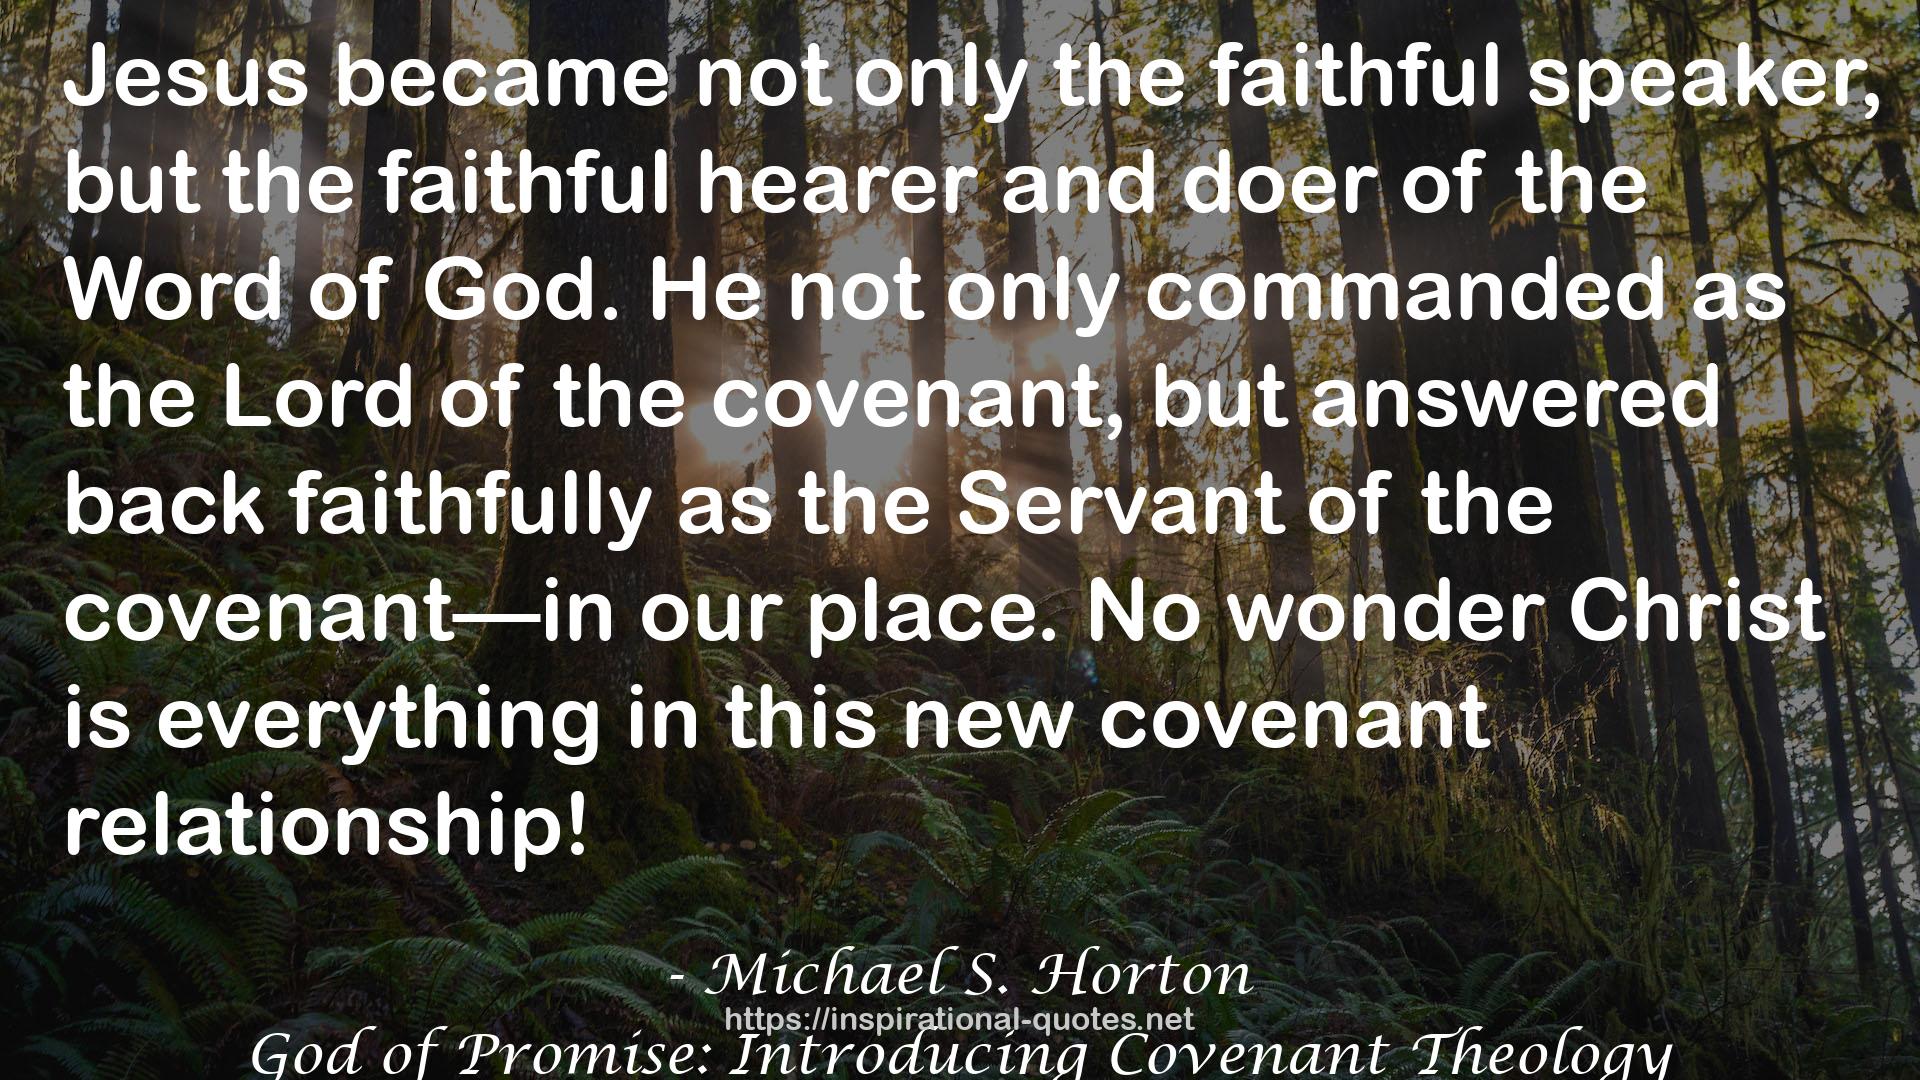 God of Promise: Introducing Covenant Theology QUOTES